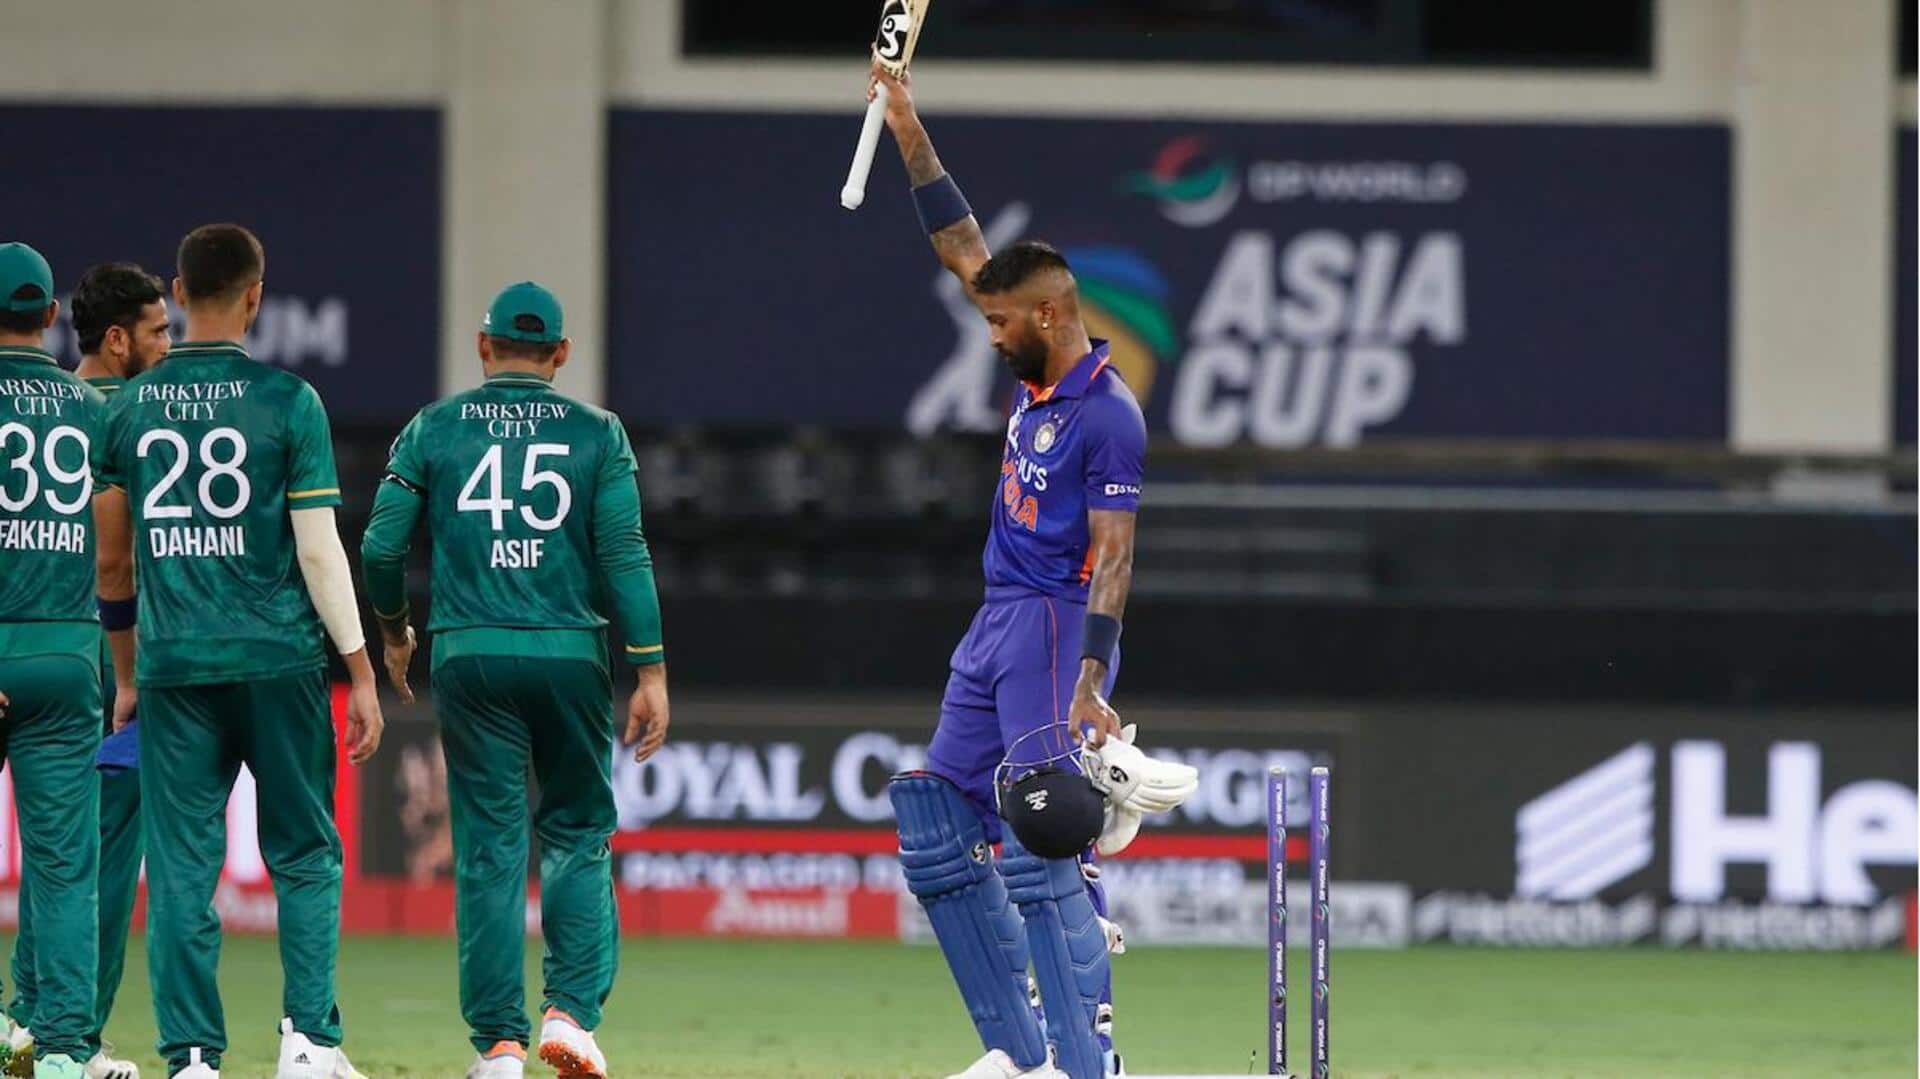 Asia Cup, Pakistan vs India: Preview, stats, and Dream11 prediction